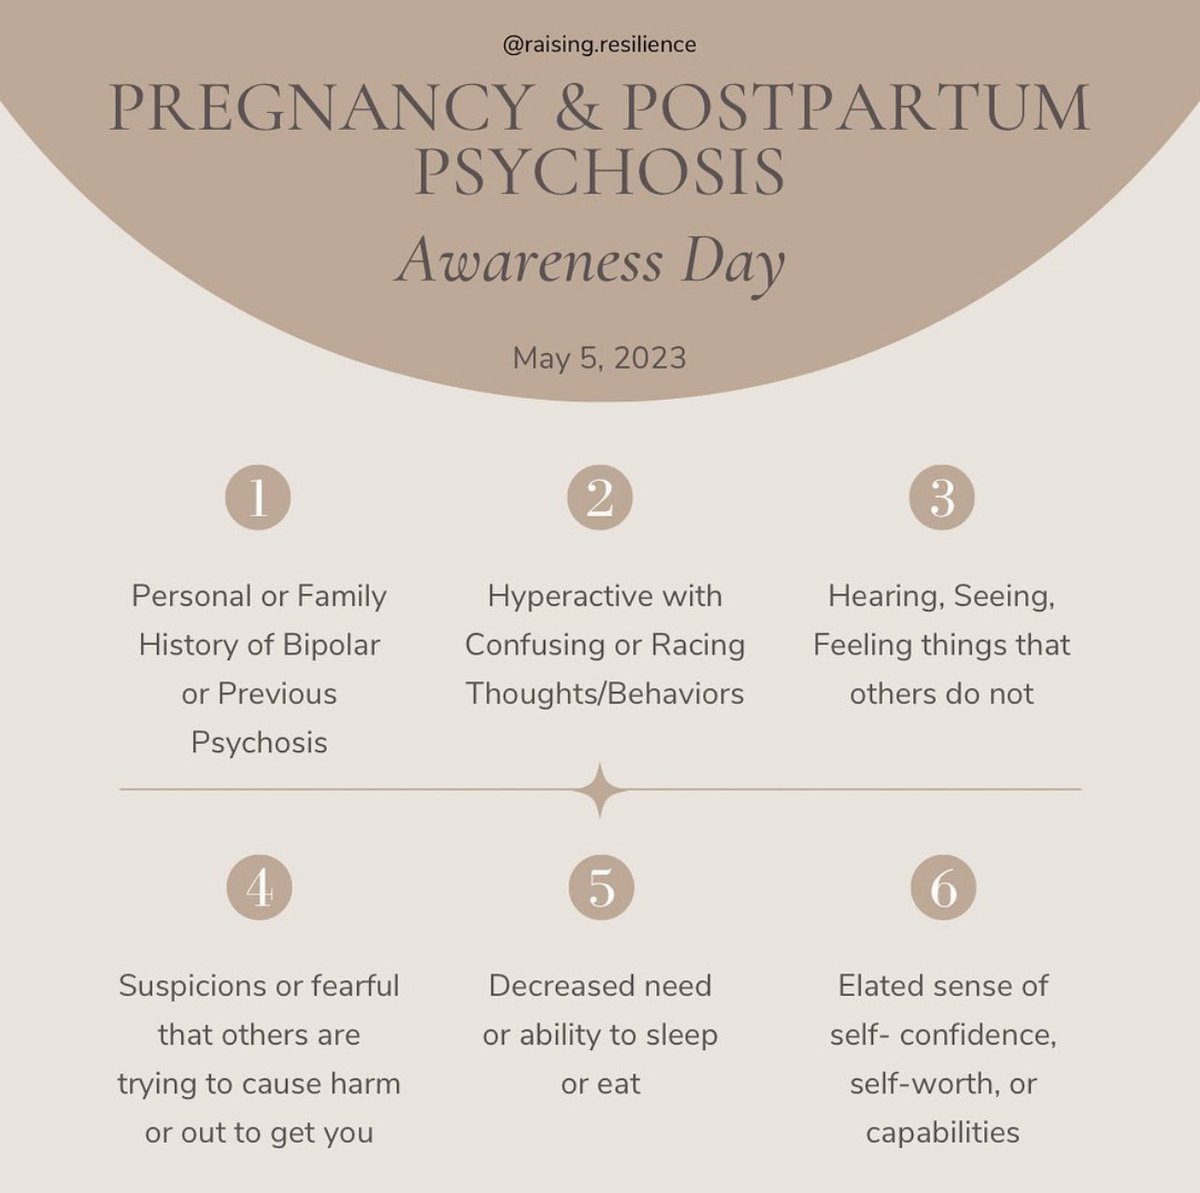 Postpartum psychosis occurs in approximately 1-2 out of every 1,000 deliveries, with symptoms occurring as early as the first 48 to 72 hours postpartum. However, most episodes develop within the first 2 weeks. #MaternalMentalHealthWeek